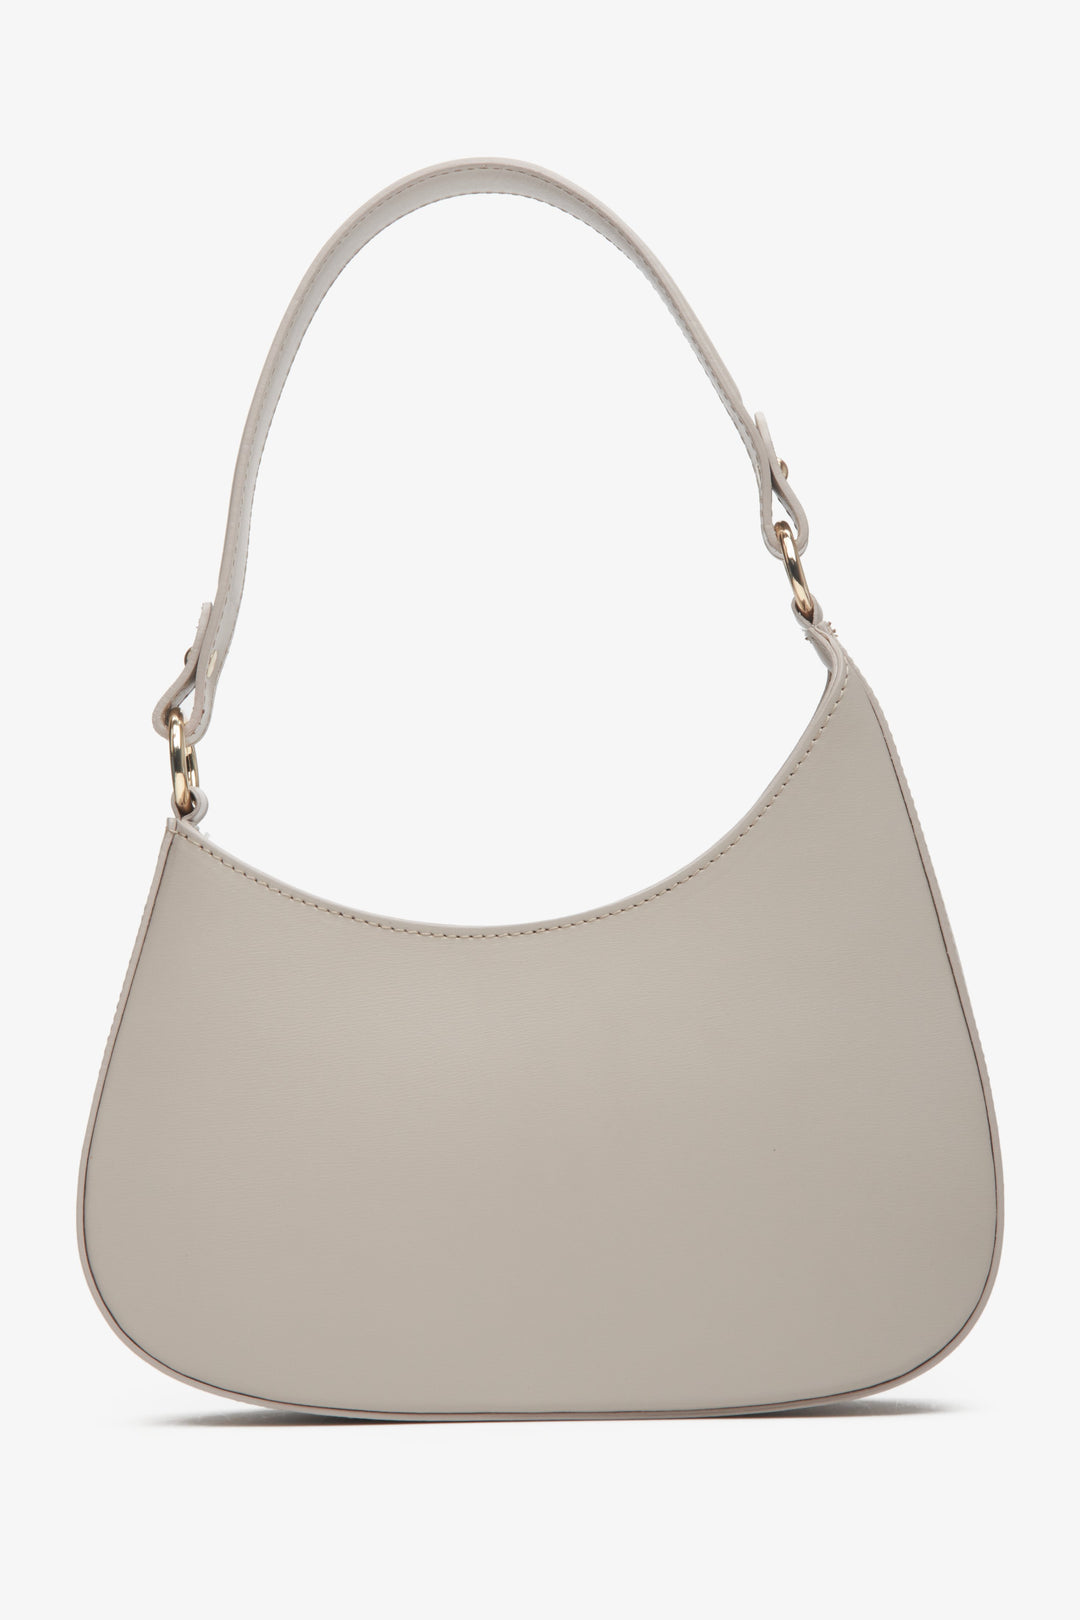 Estro women's handbag in beige and grey  natural leather sewn in Italy.